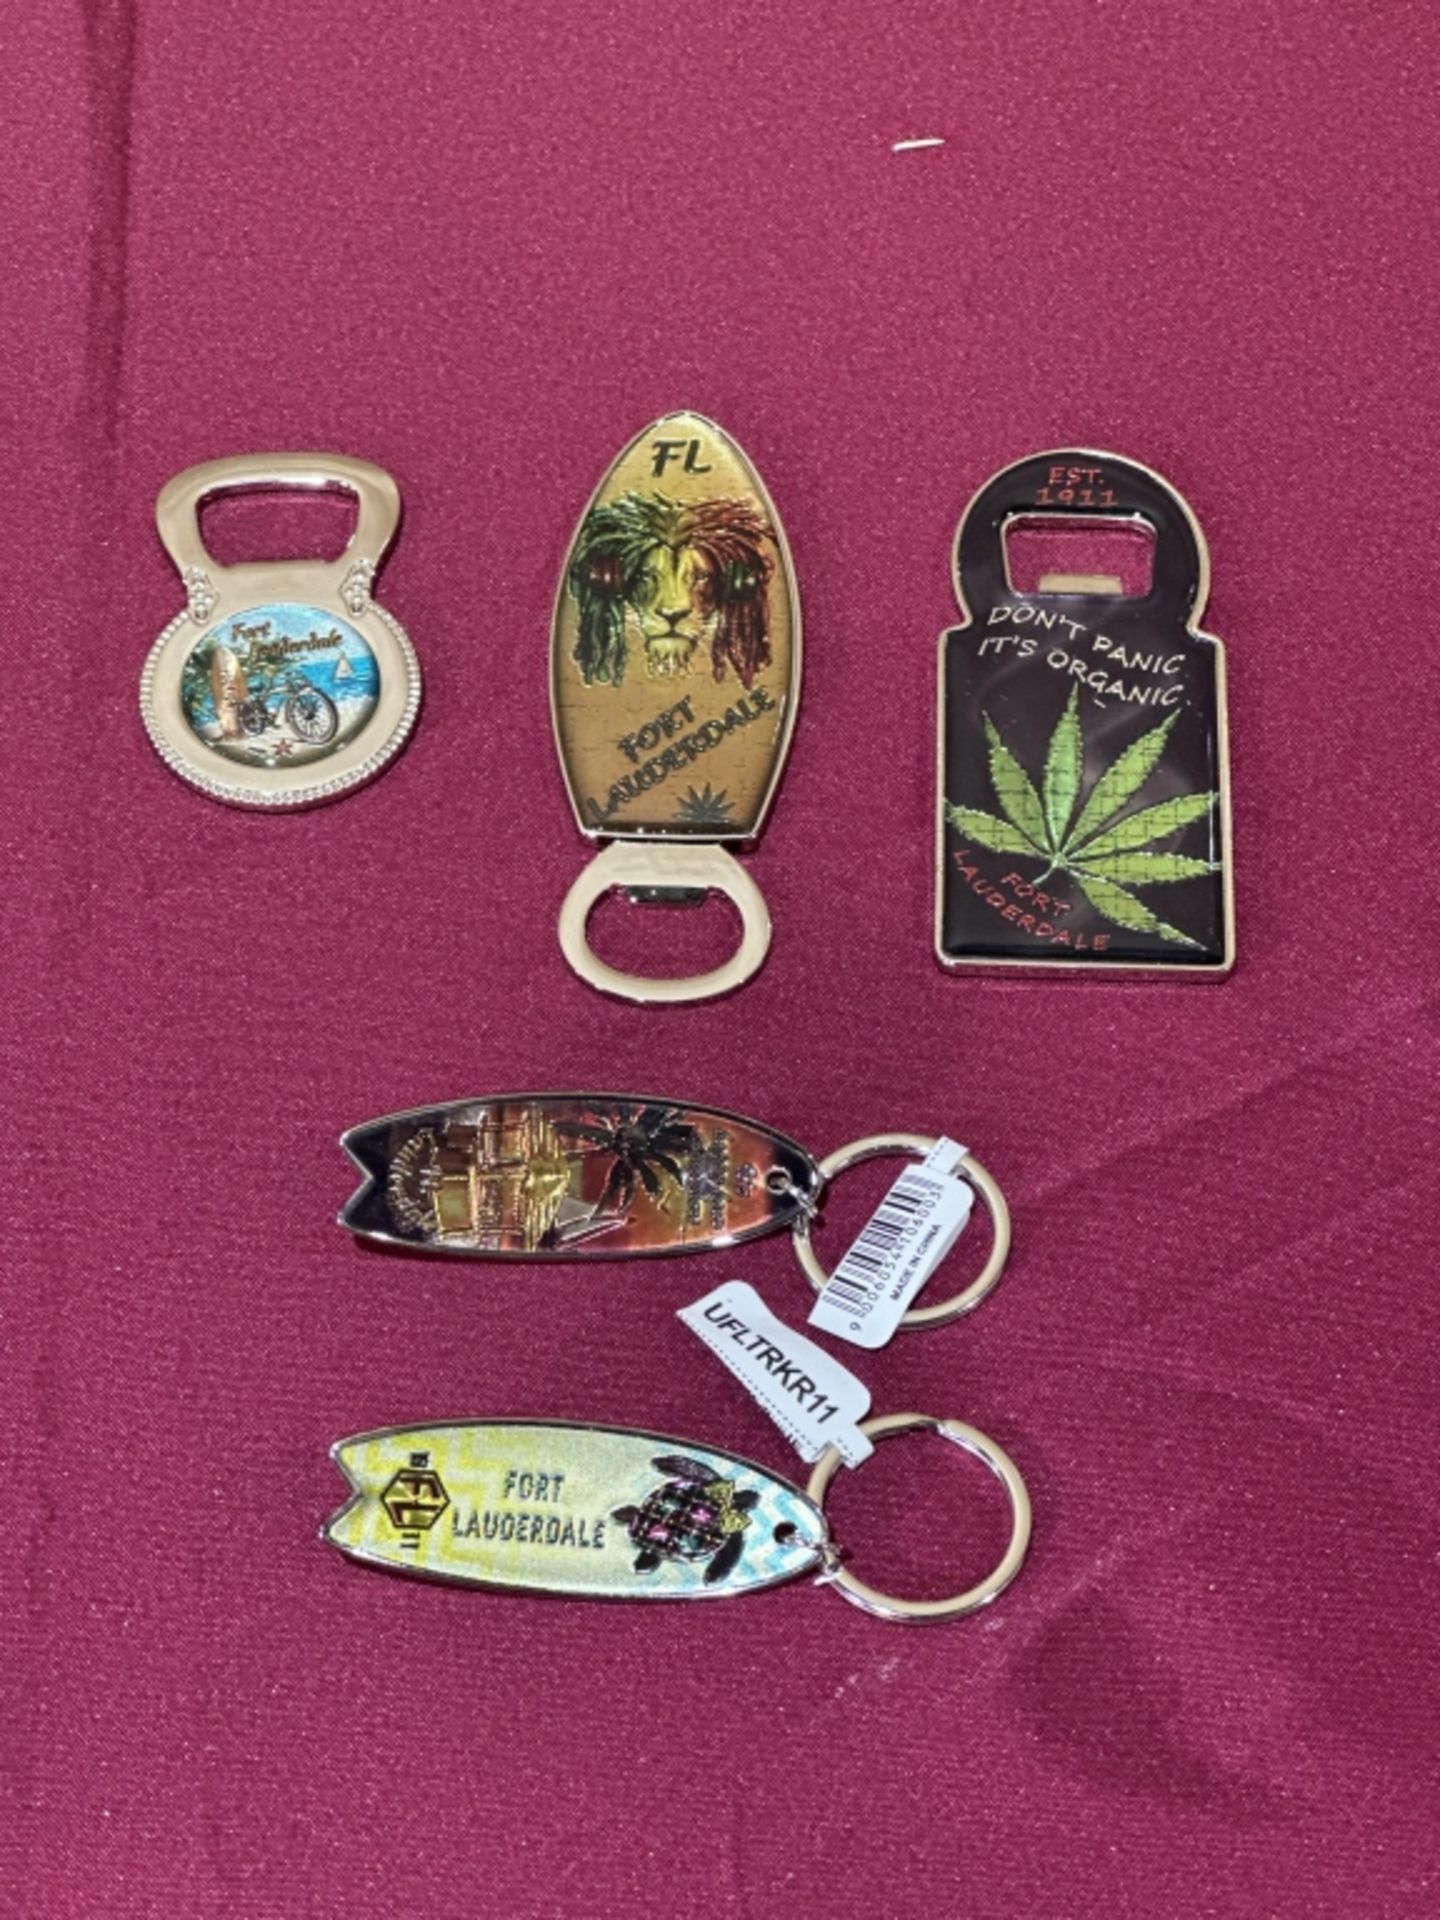 LOT CONSISTING OF ASSORTED BEACH-THEMED SOUVENIRS - Image 6 of 10